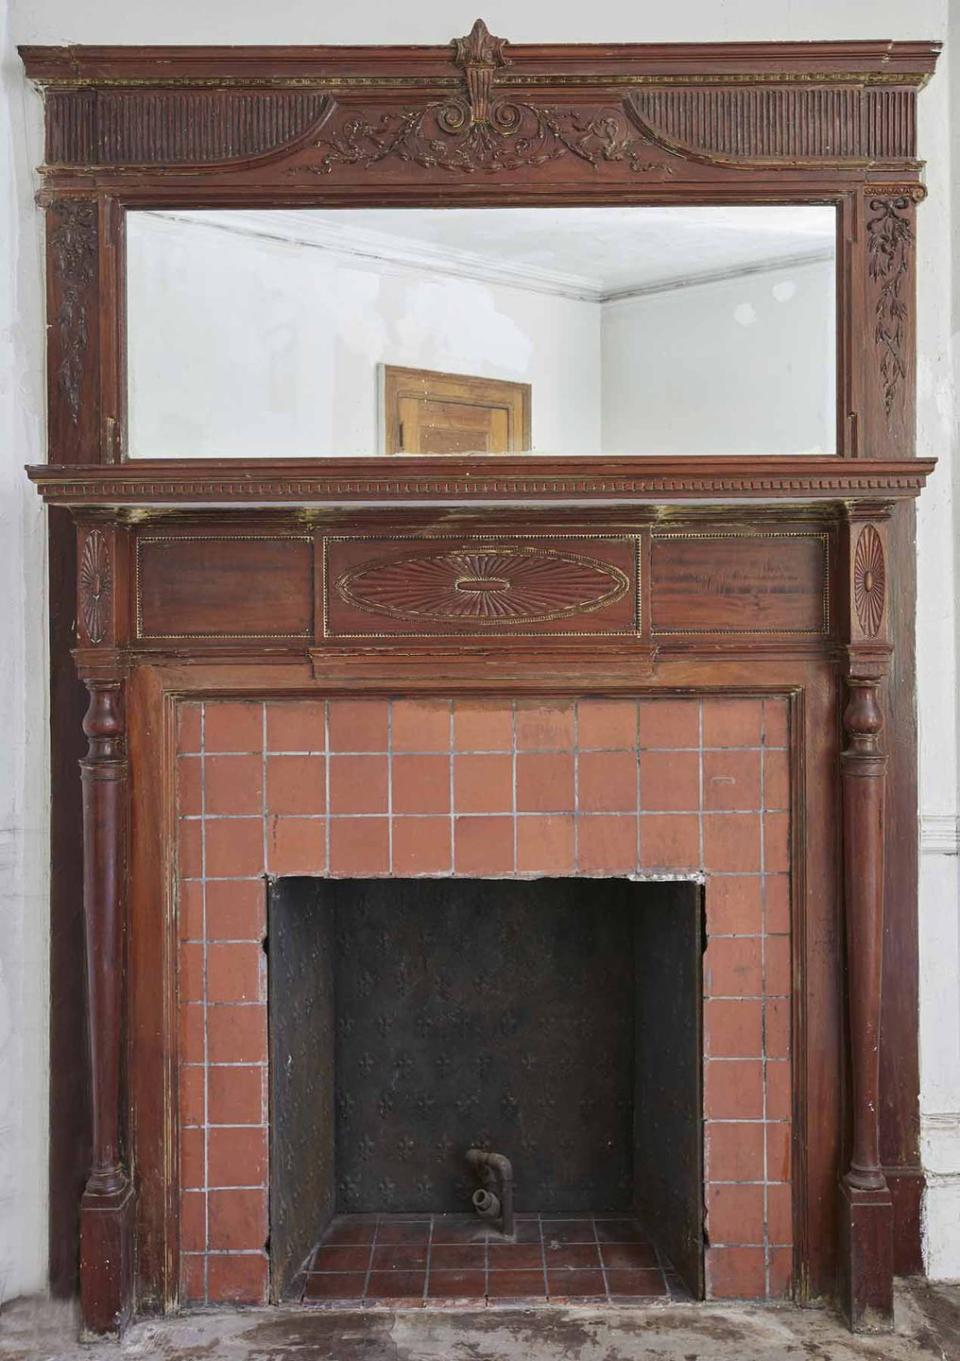 Here's another original mantel, which adds to the home's character.